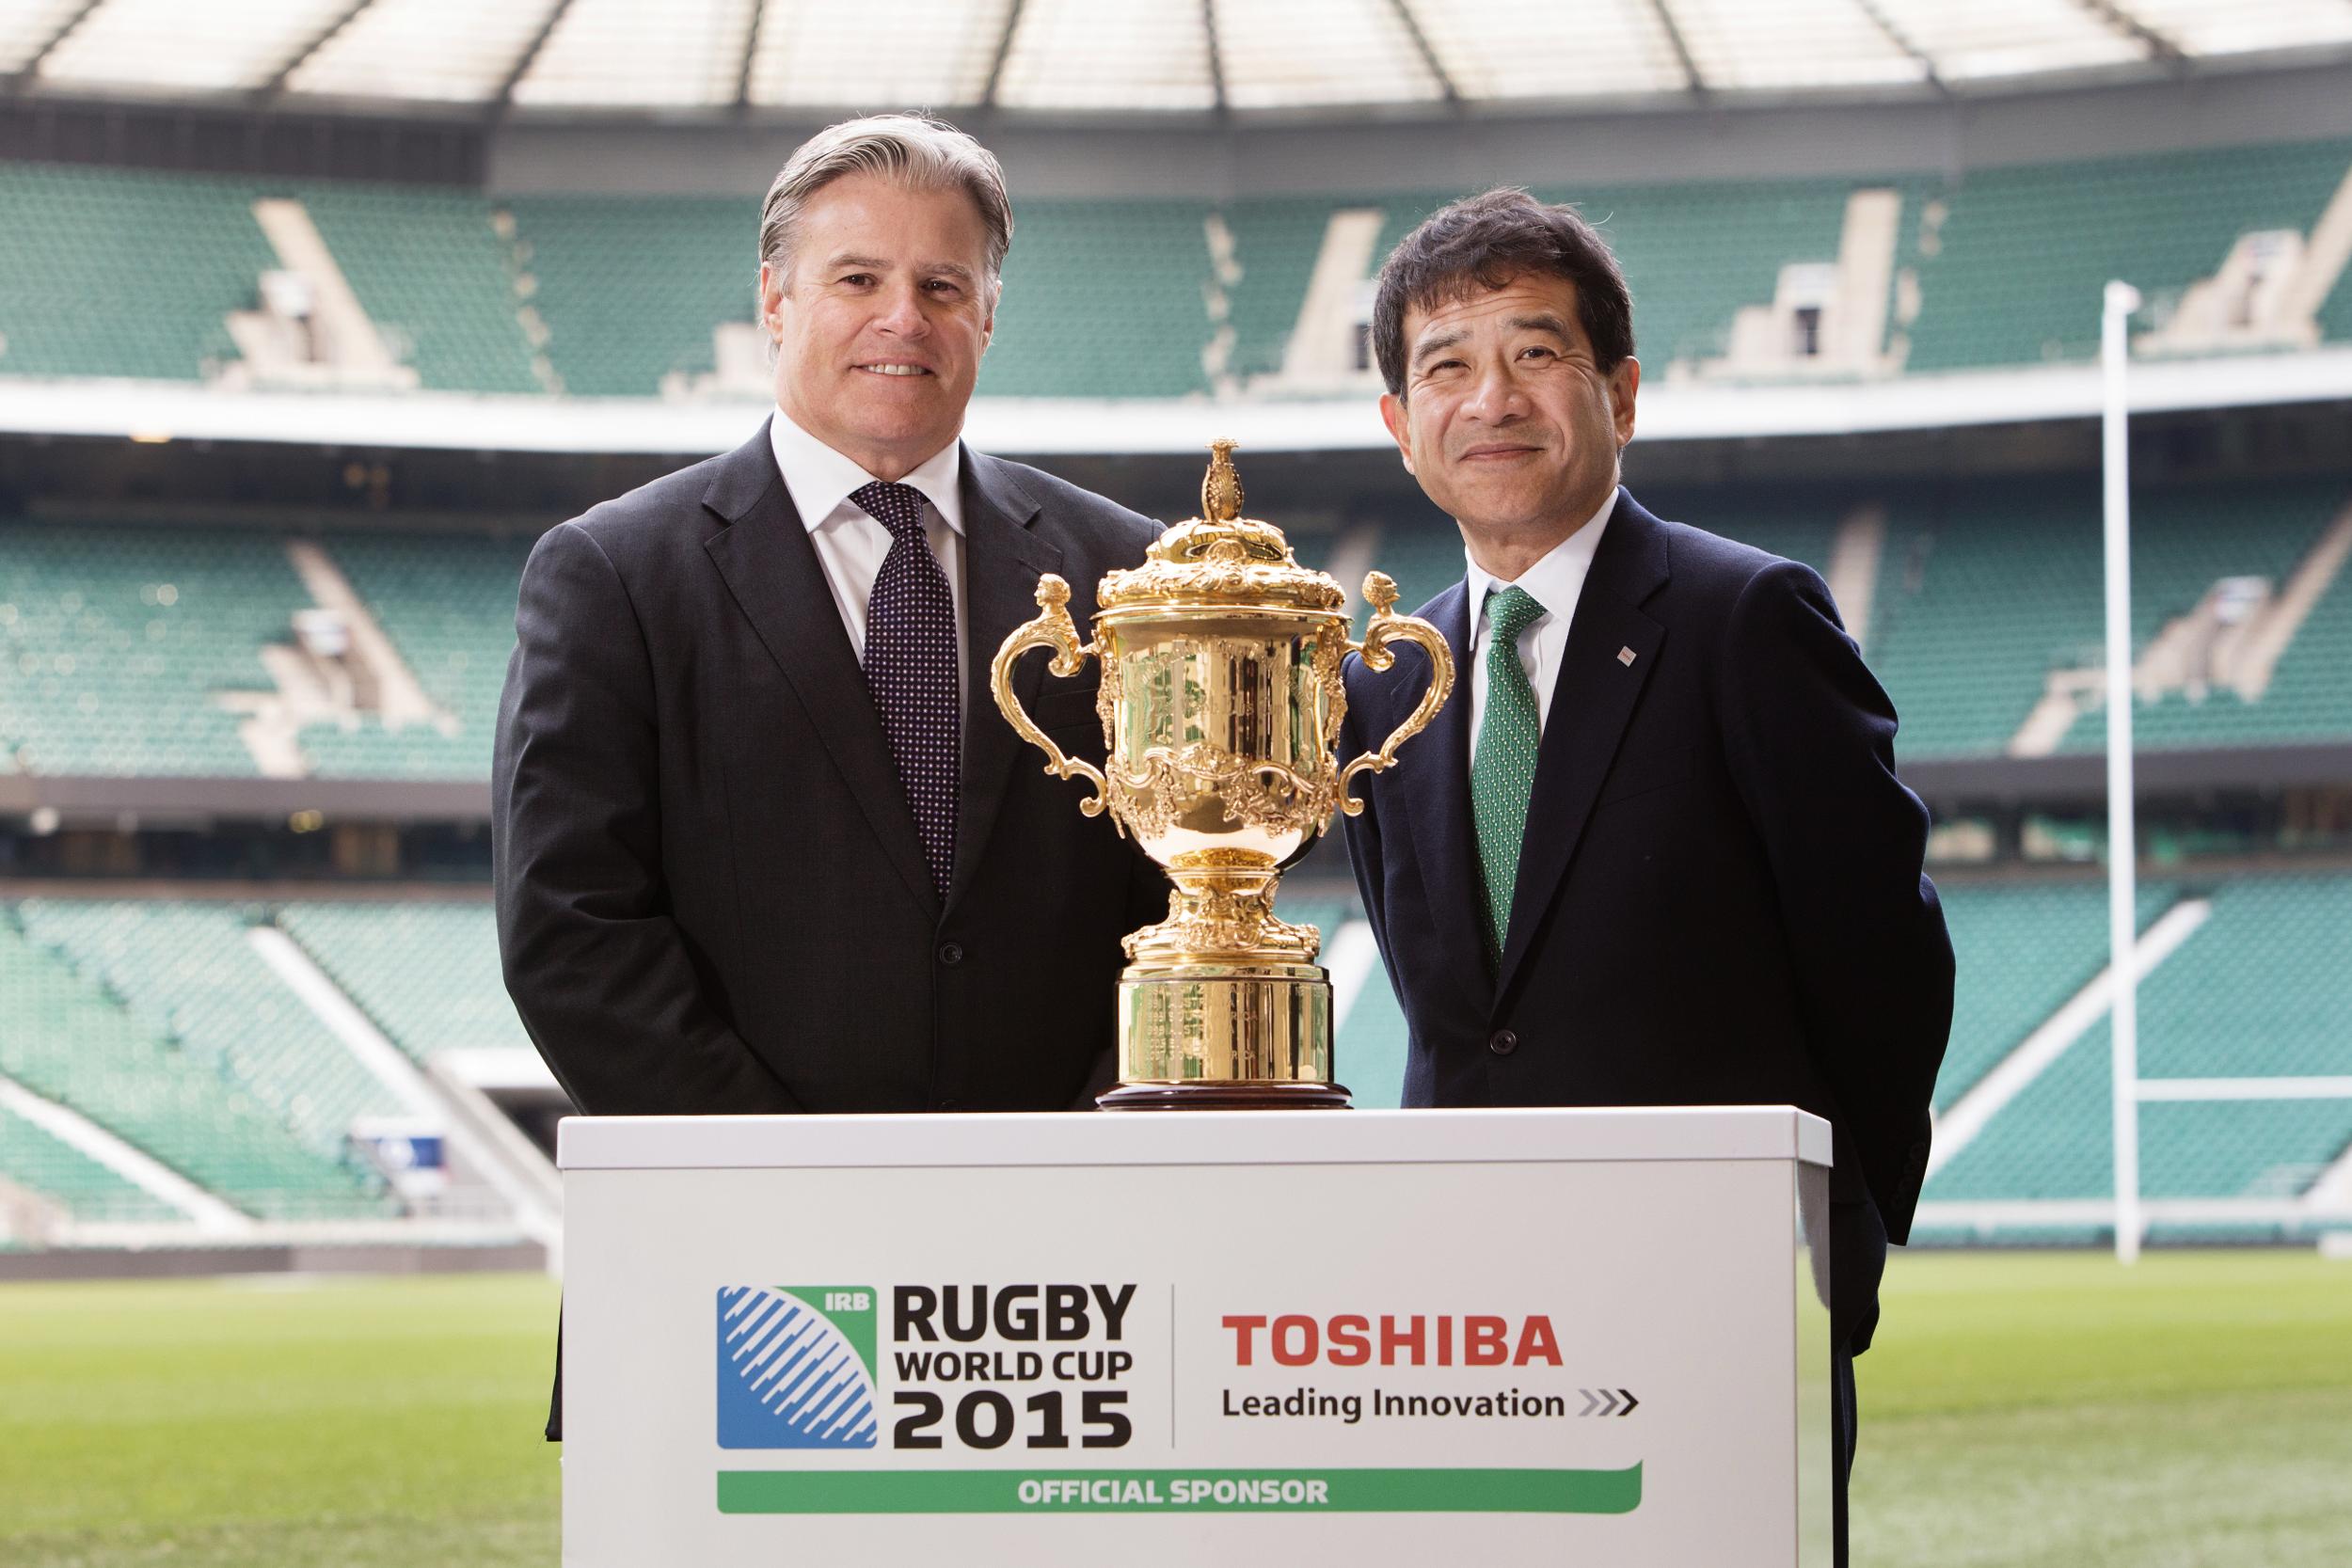 Toshiba have been announced as an official partner for England 2015